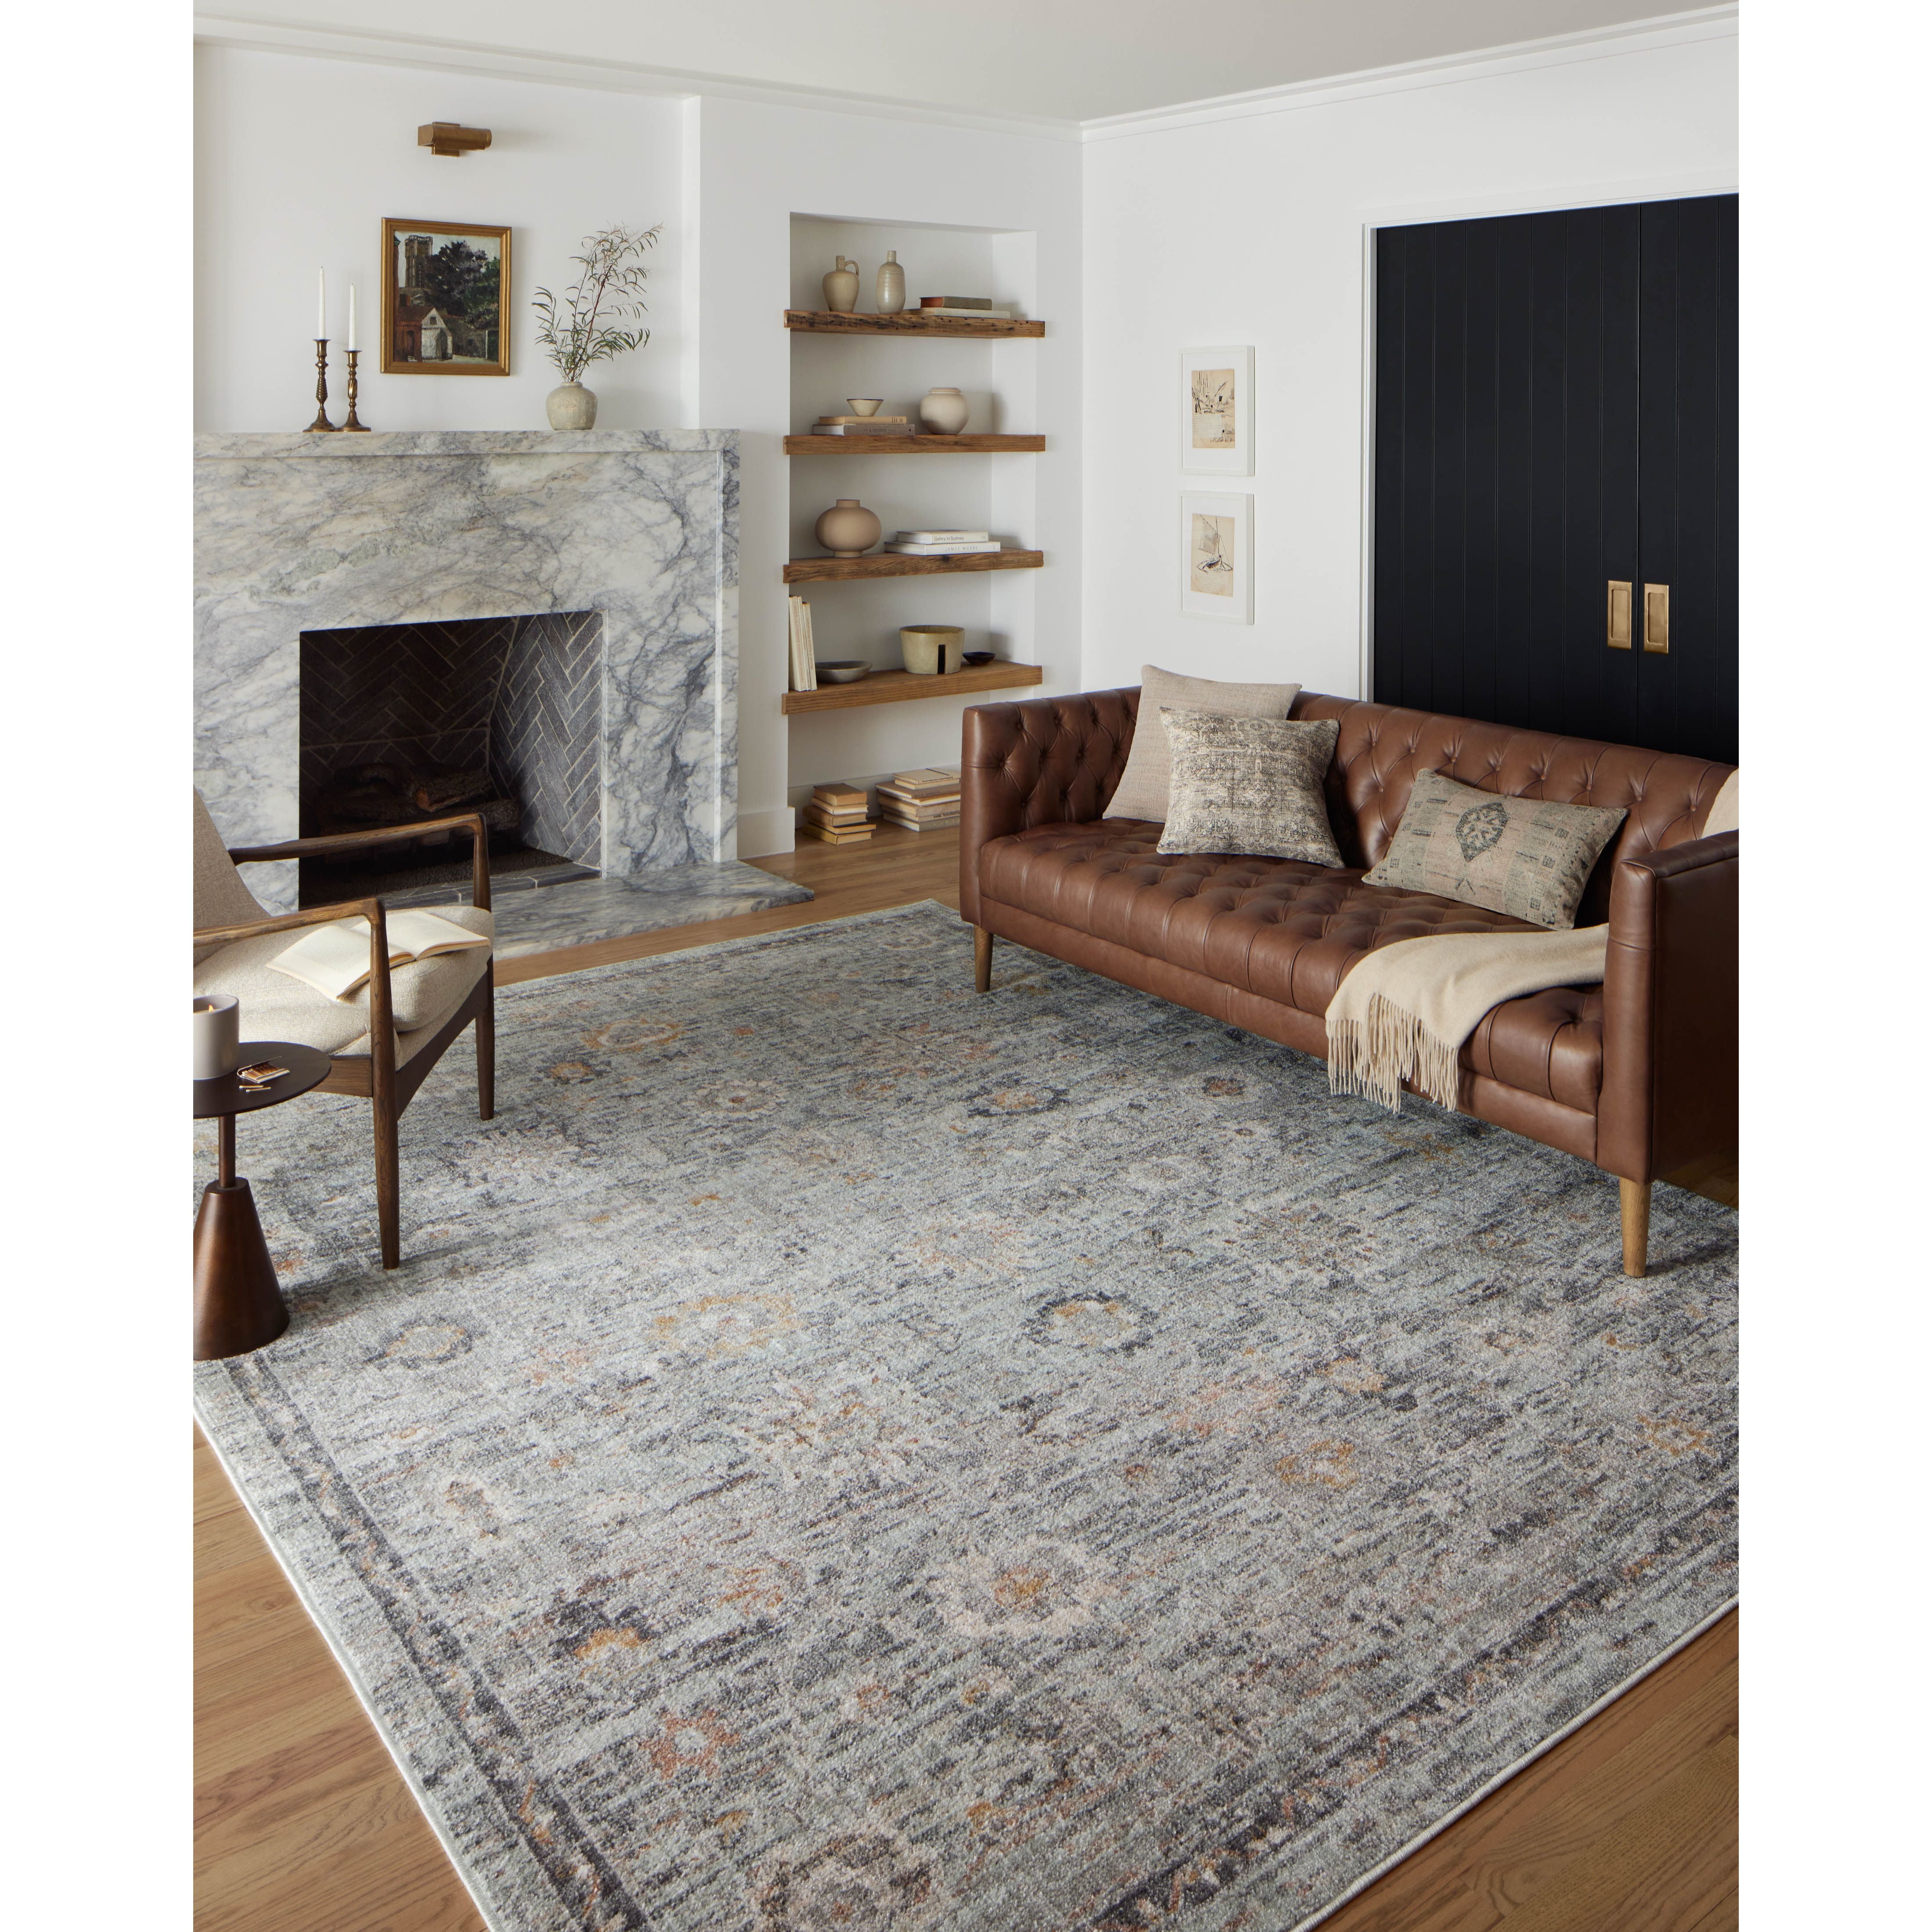 Inspired by antique Turkish Oushak carpets with large-scale motifs, the Monroe Sky / Gold Rug modernizes the traditional design in neutral palettes, many of which have black details that anchor the rug in the room. Monroe is power-loomed of 100% polypropylene for easy care and reliable durability. Amethyst Home provides interior design, new home construction design consulting, vintage area rugs, and lighting in the Houston metro area.